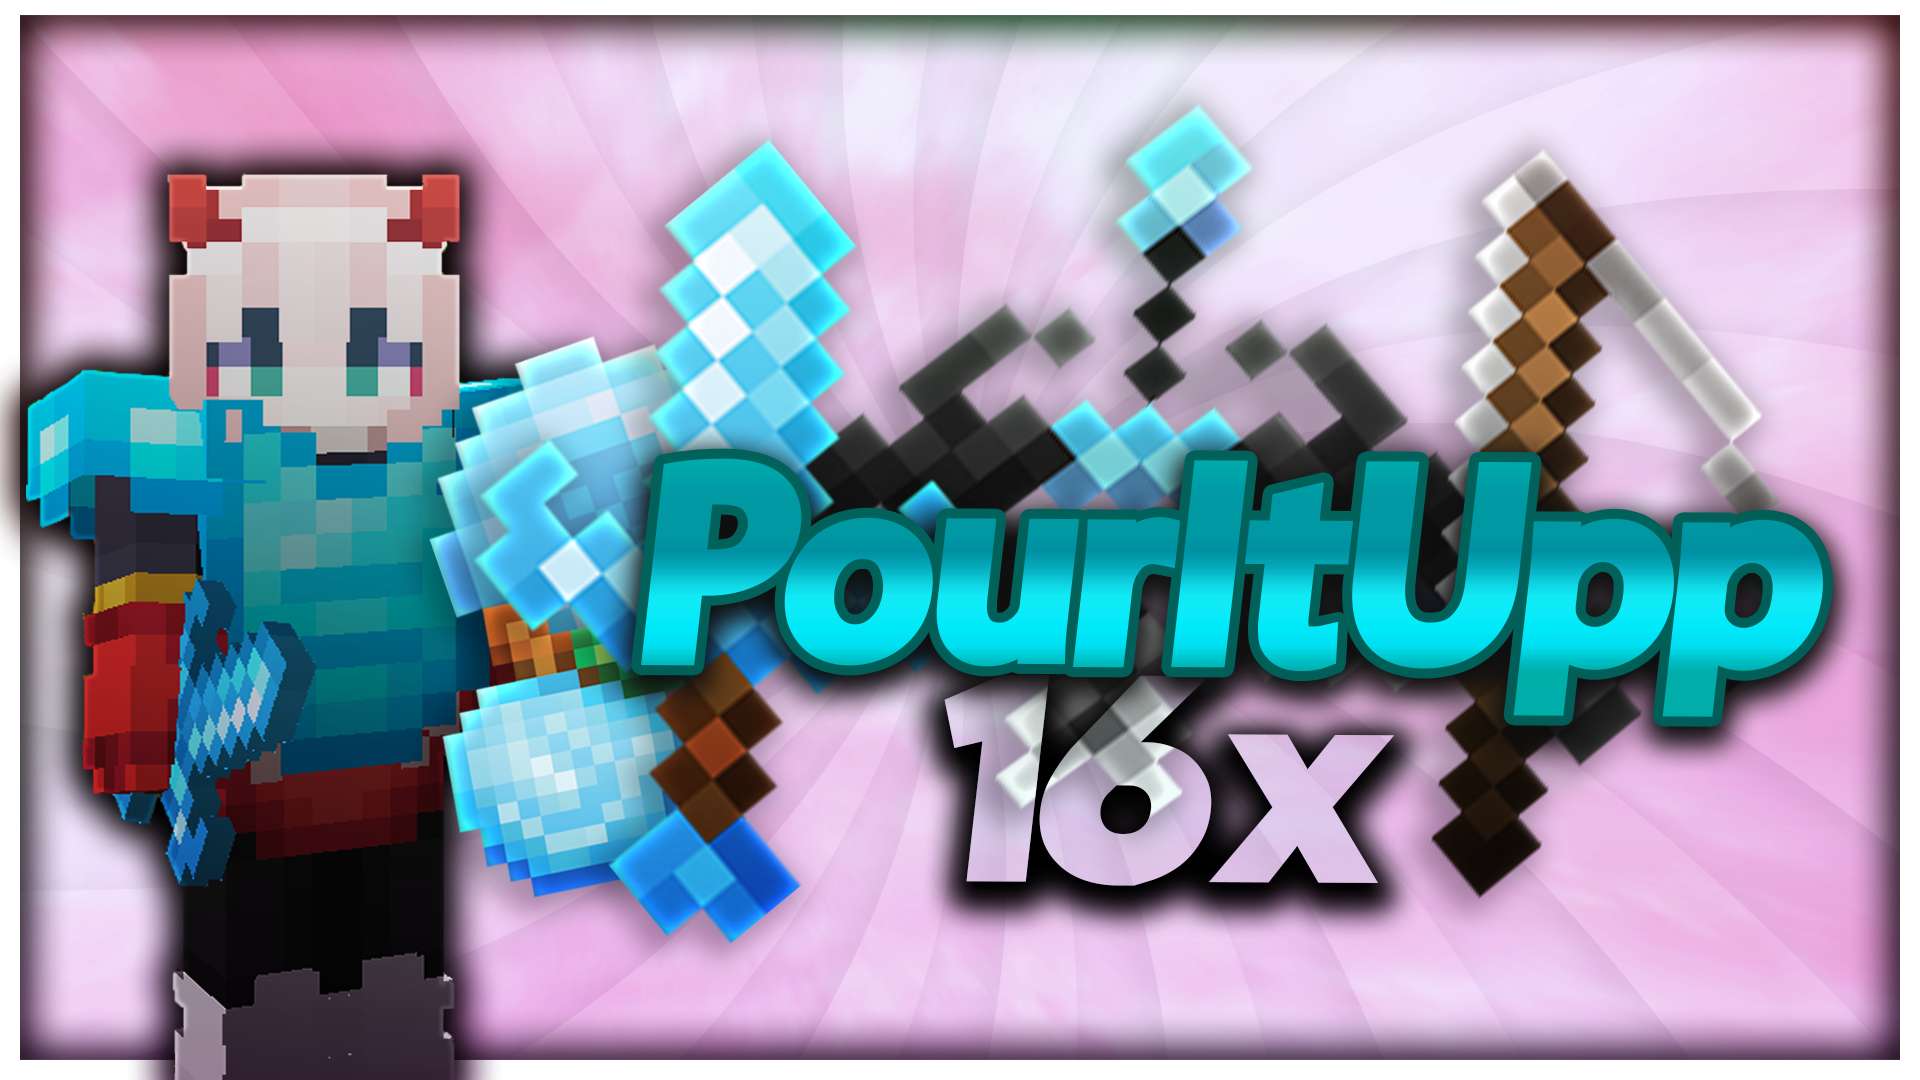 PourItUpp! 16 by NVU on PvPRP